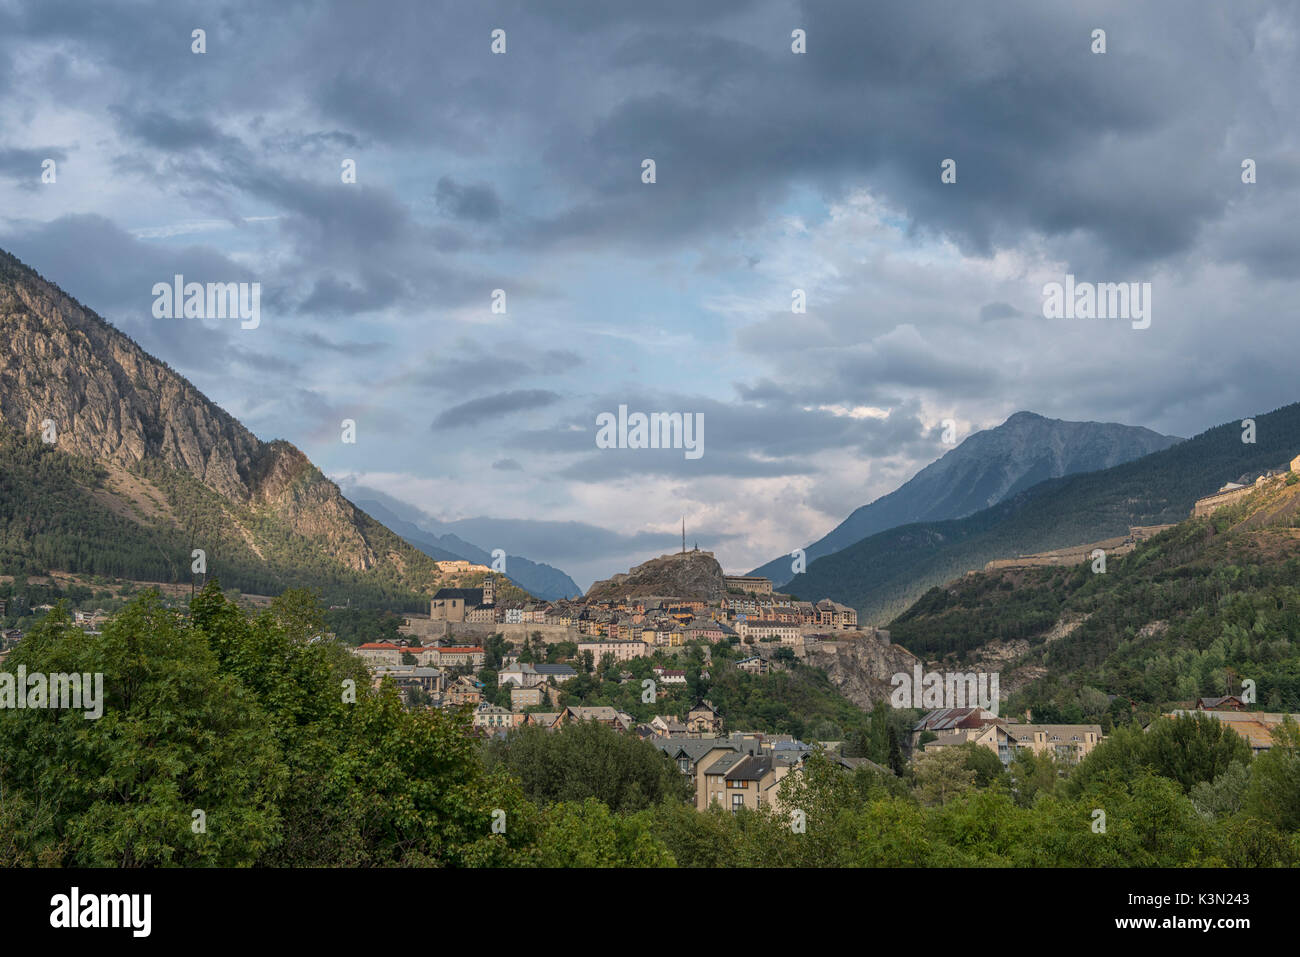 The town of Briancon in a stormy day, Provence, France Stock Photo